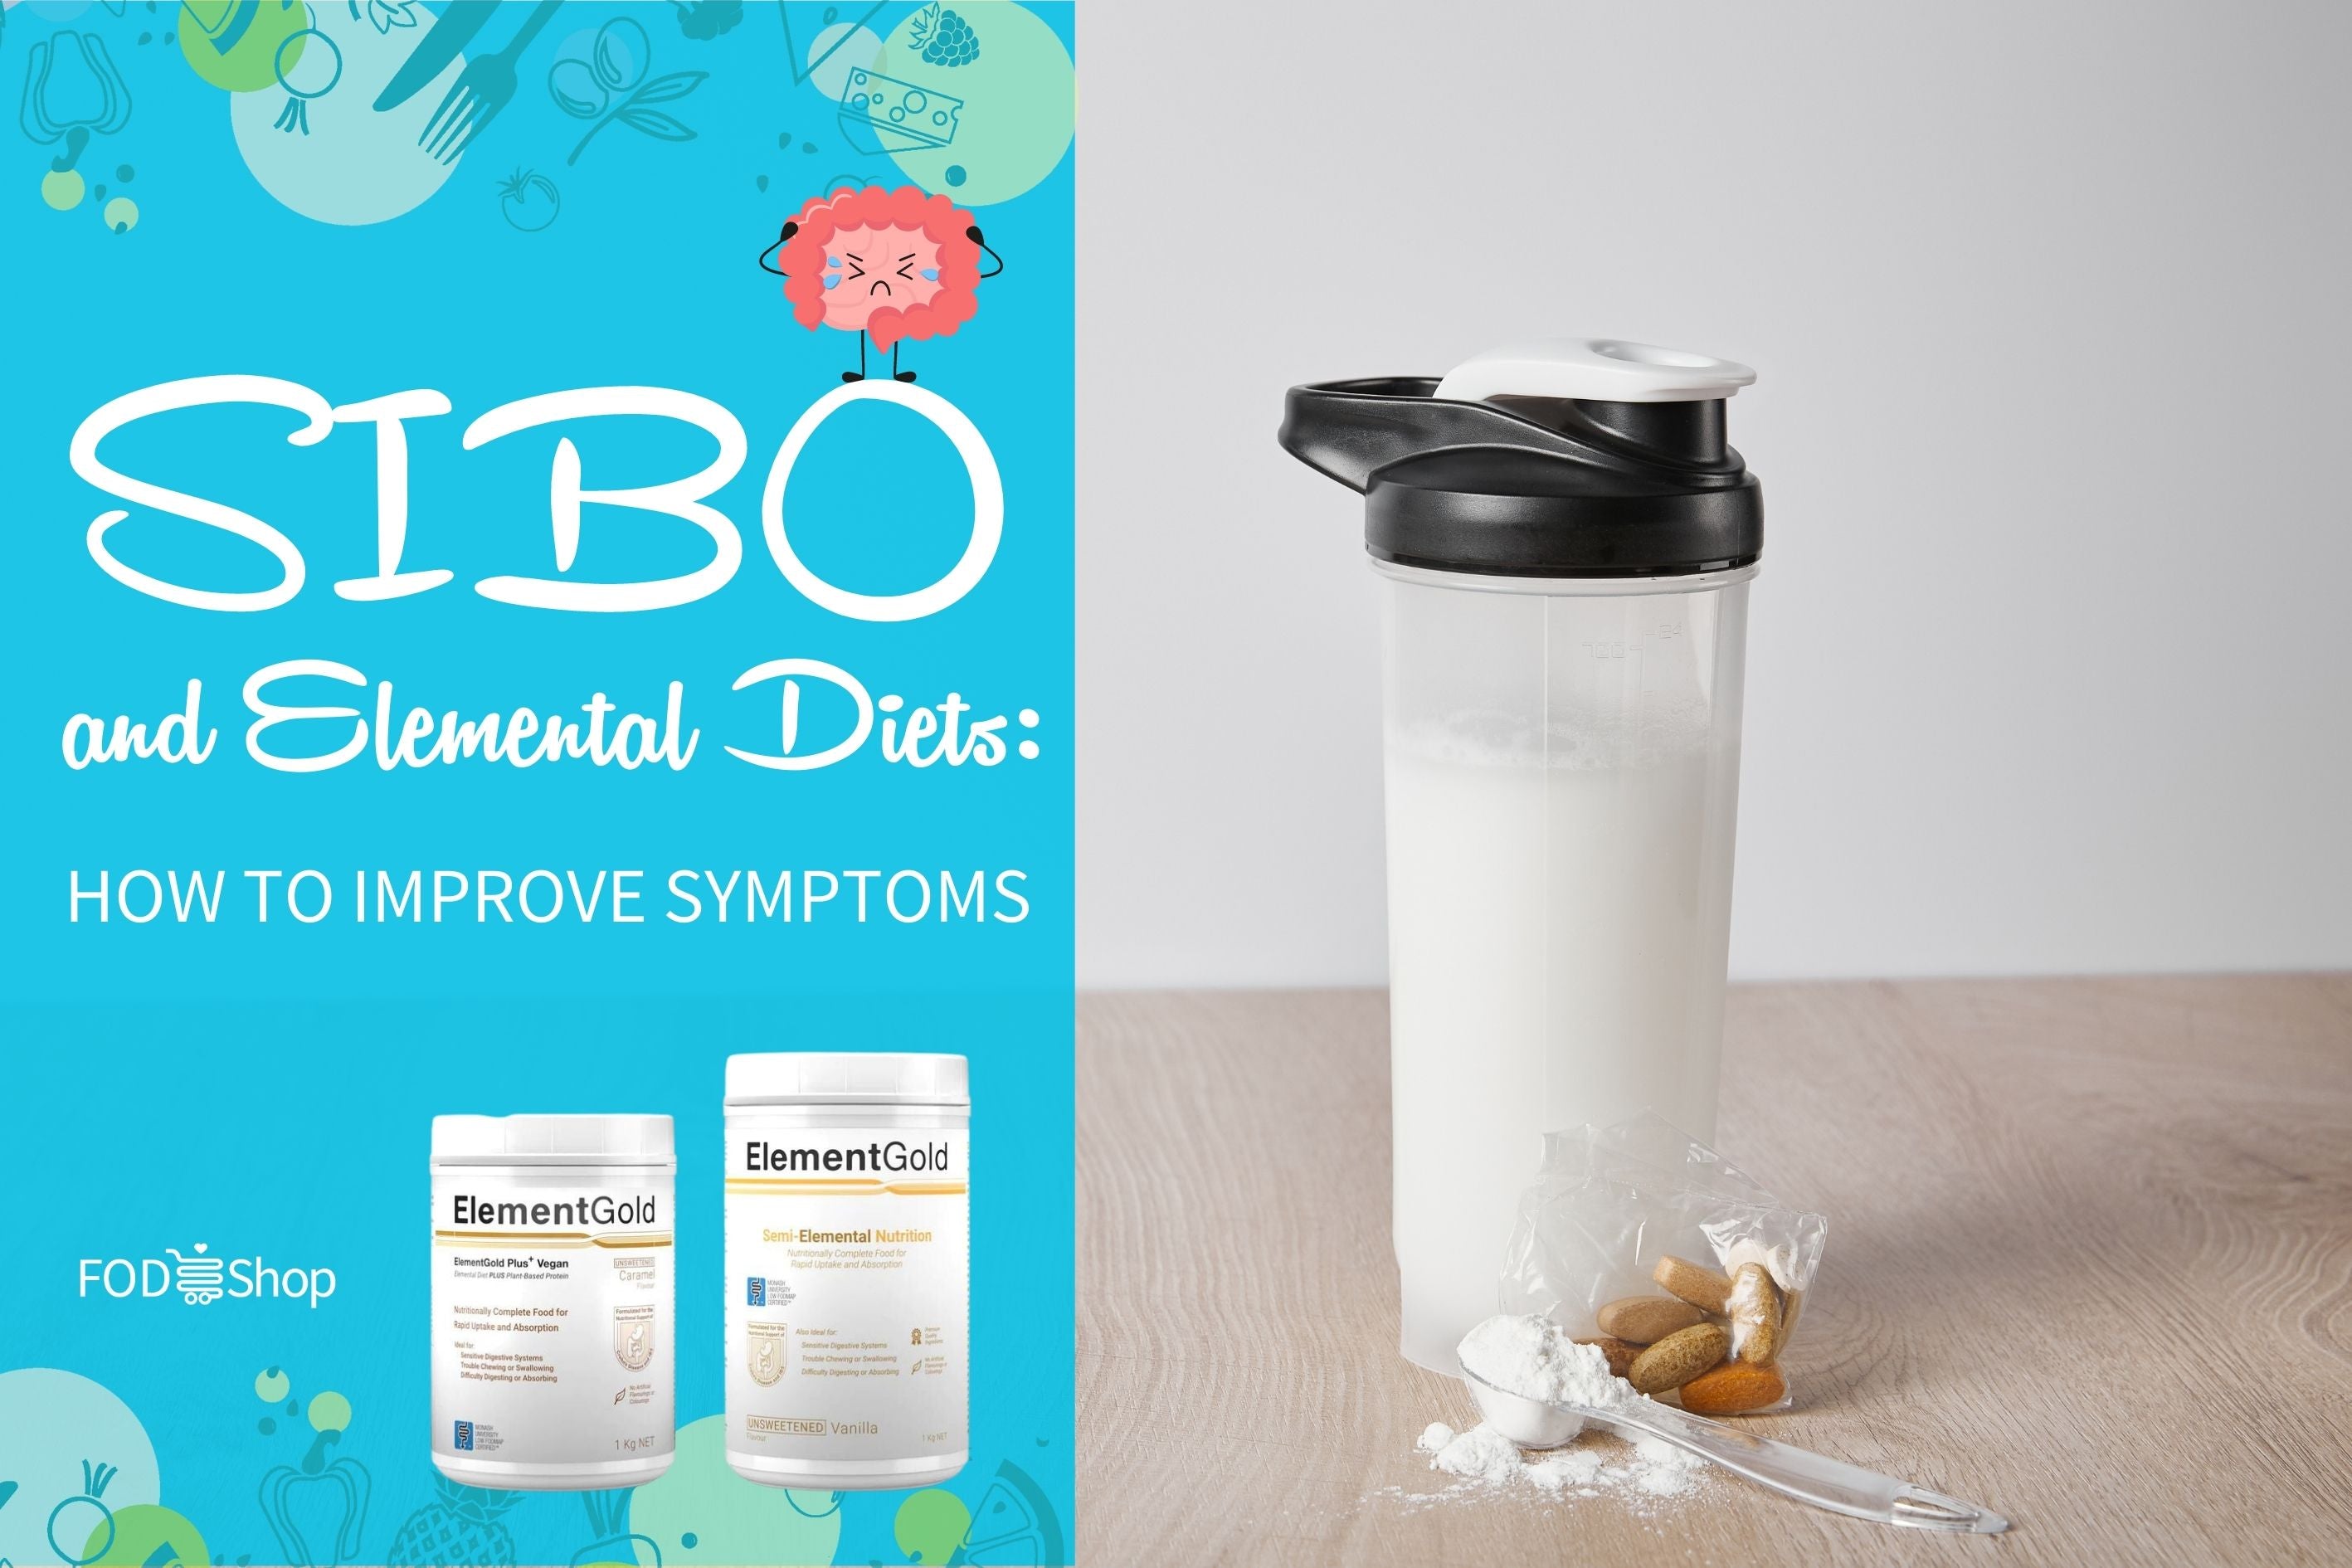 SIBO and Elemental Diets: How They Can Help Improve Symptoms